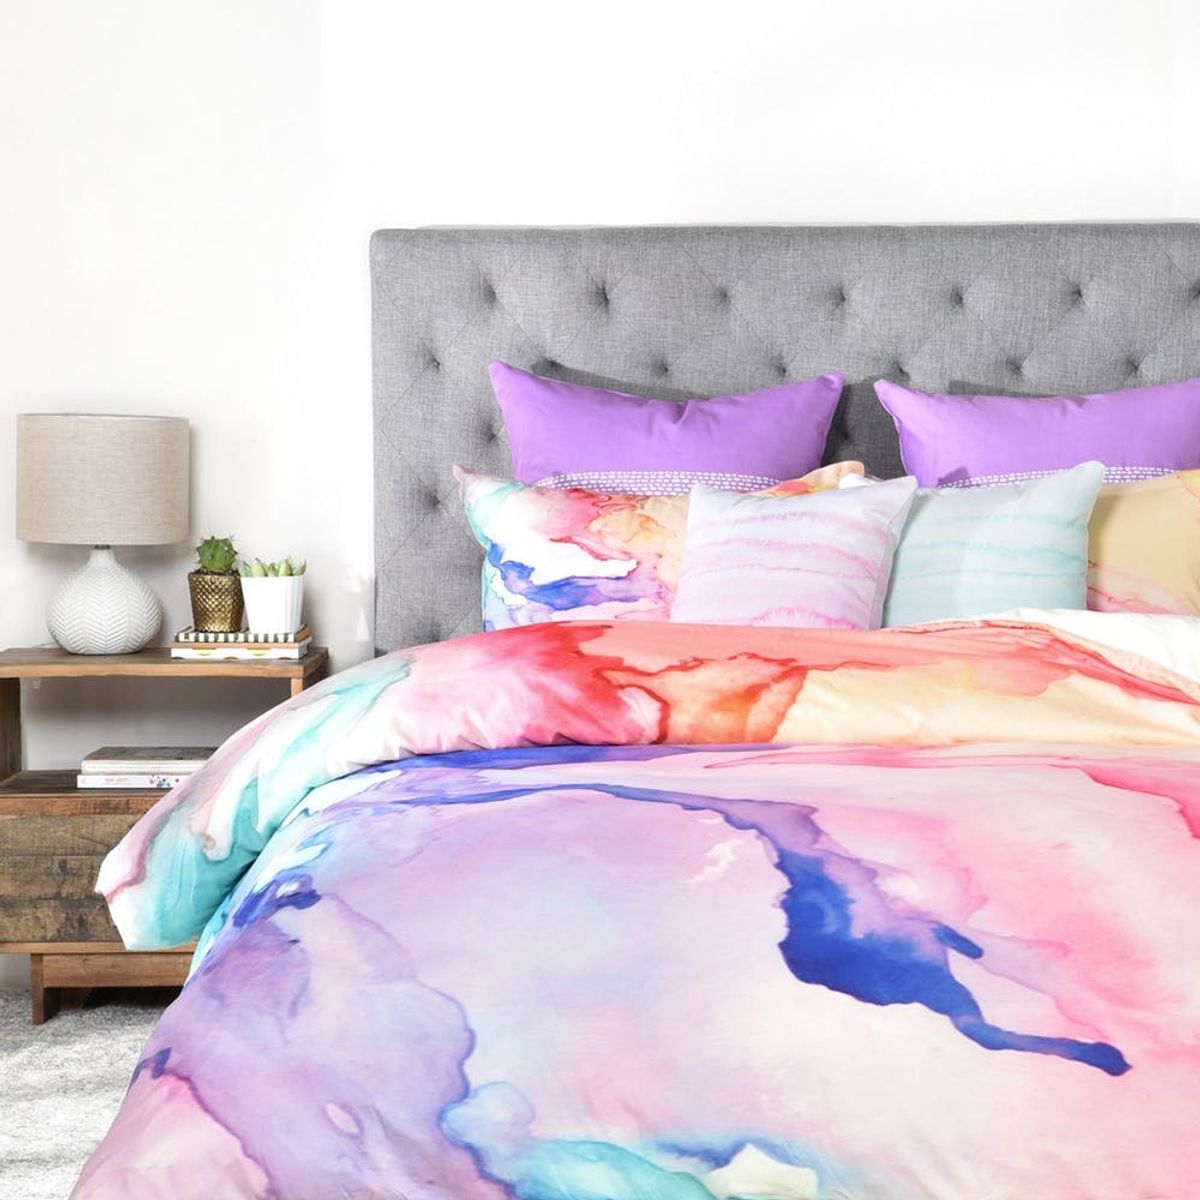 15 Patterned Duvet Covers That Make a *Big* Statement